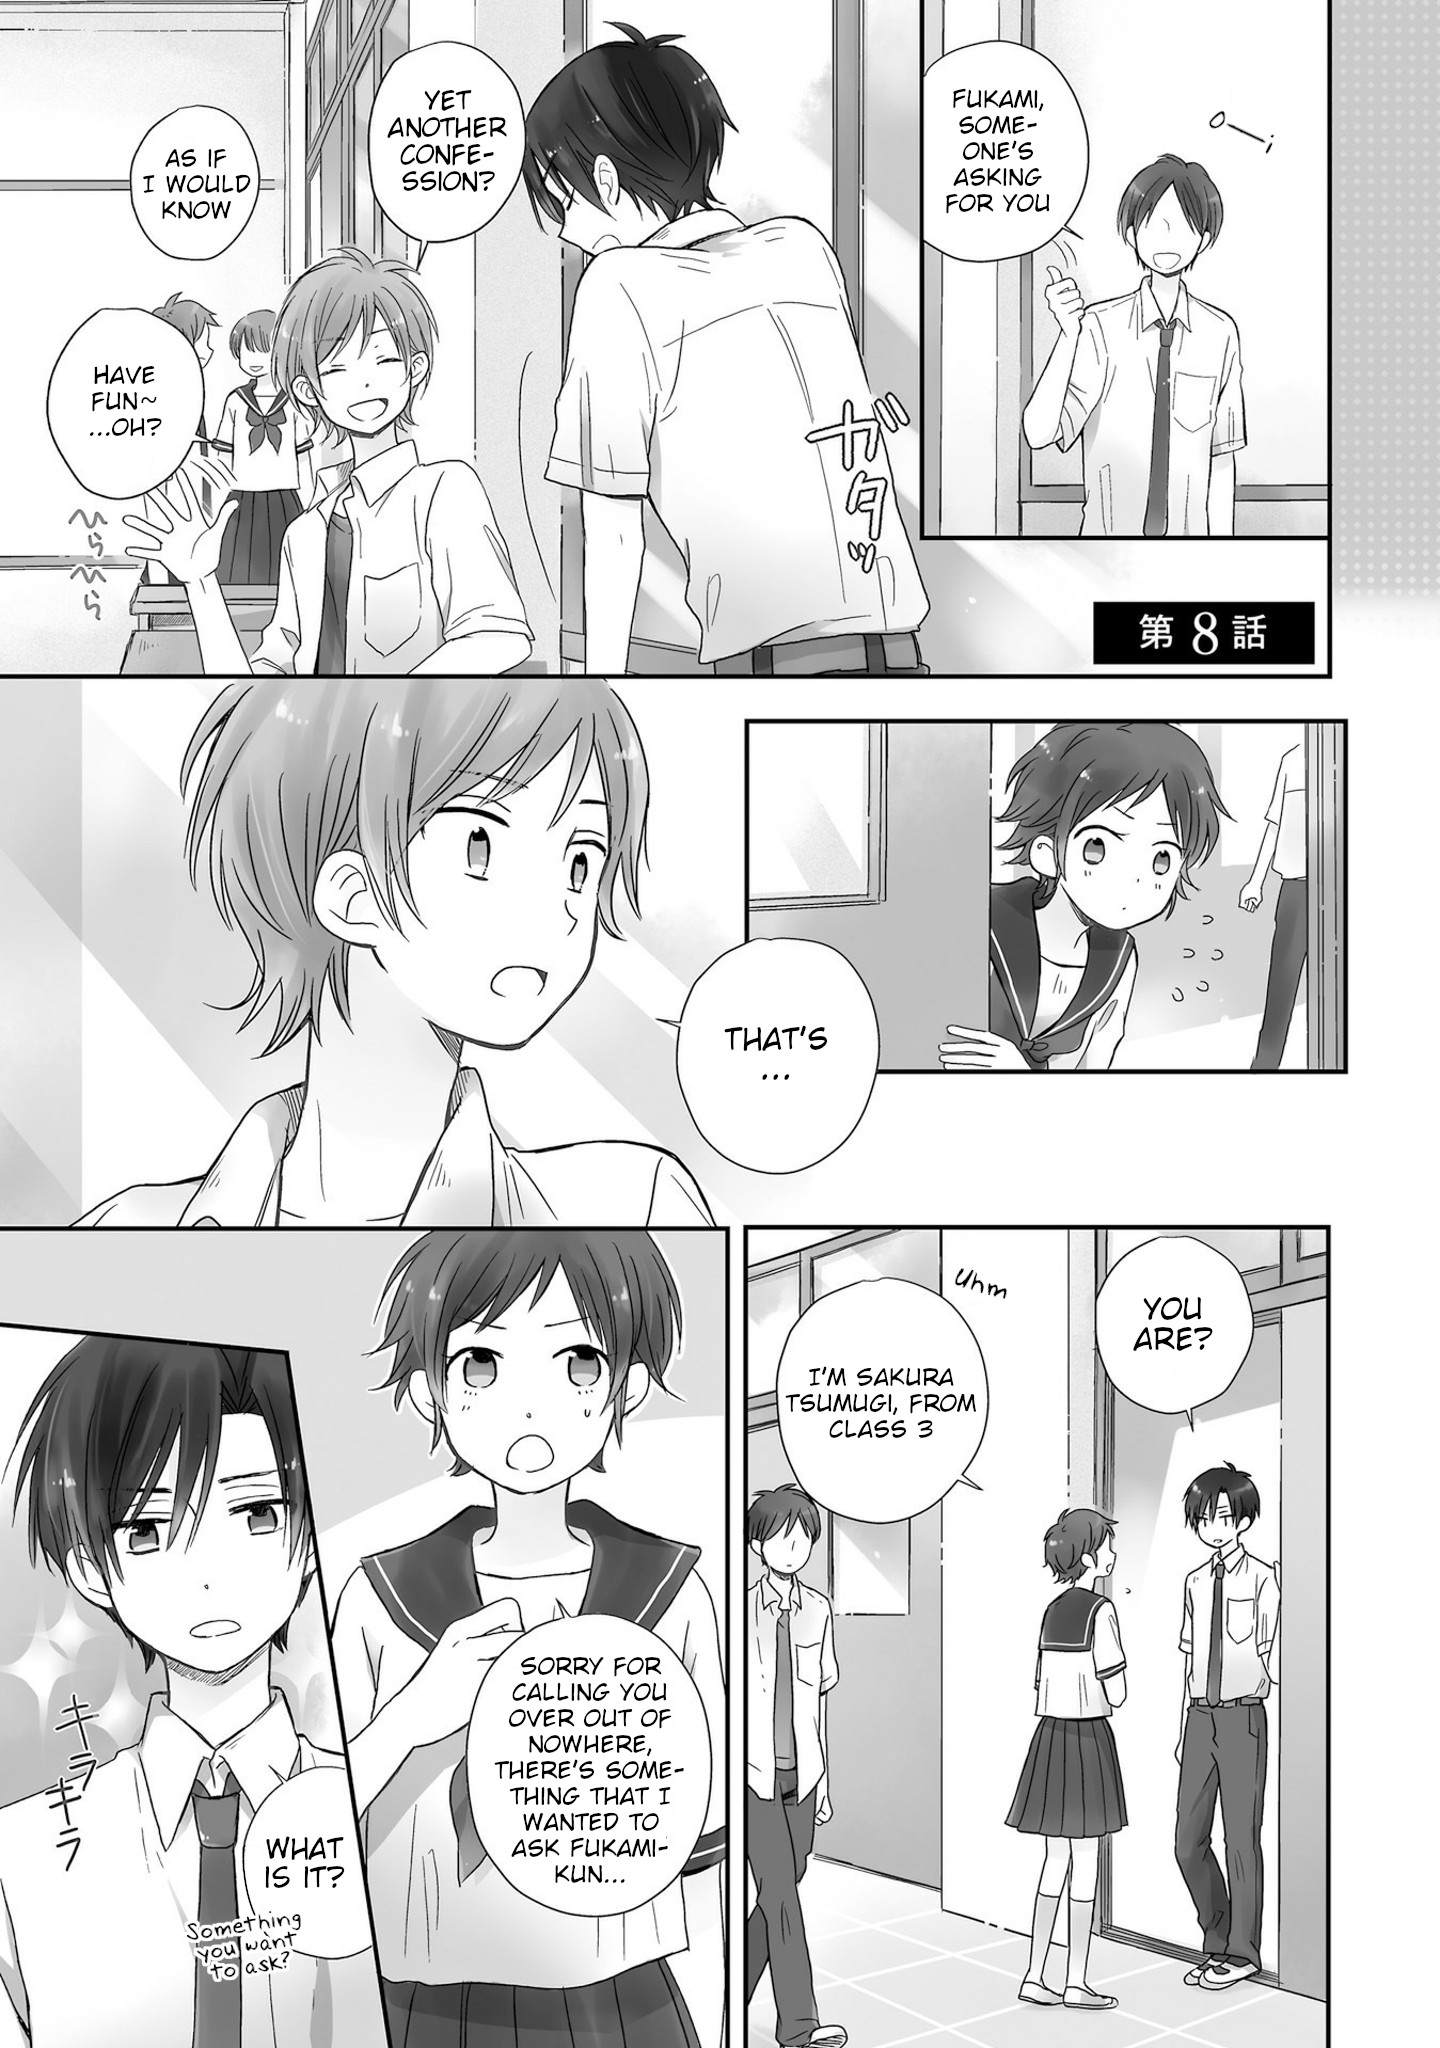 This Love Is Assumption Outside for Fukami Kun Vol.1 Chapter 8